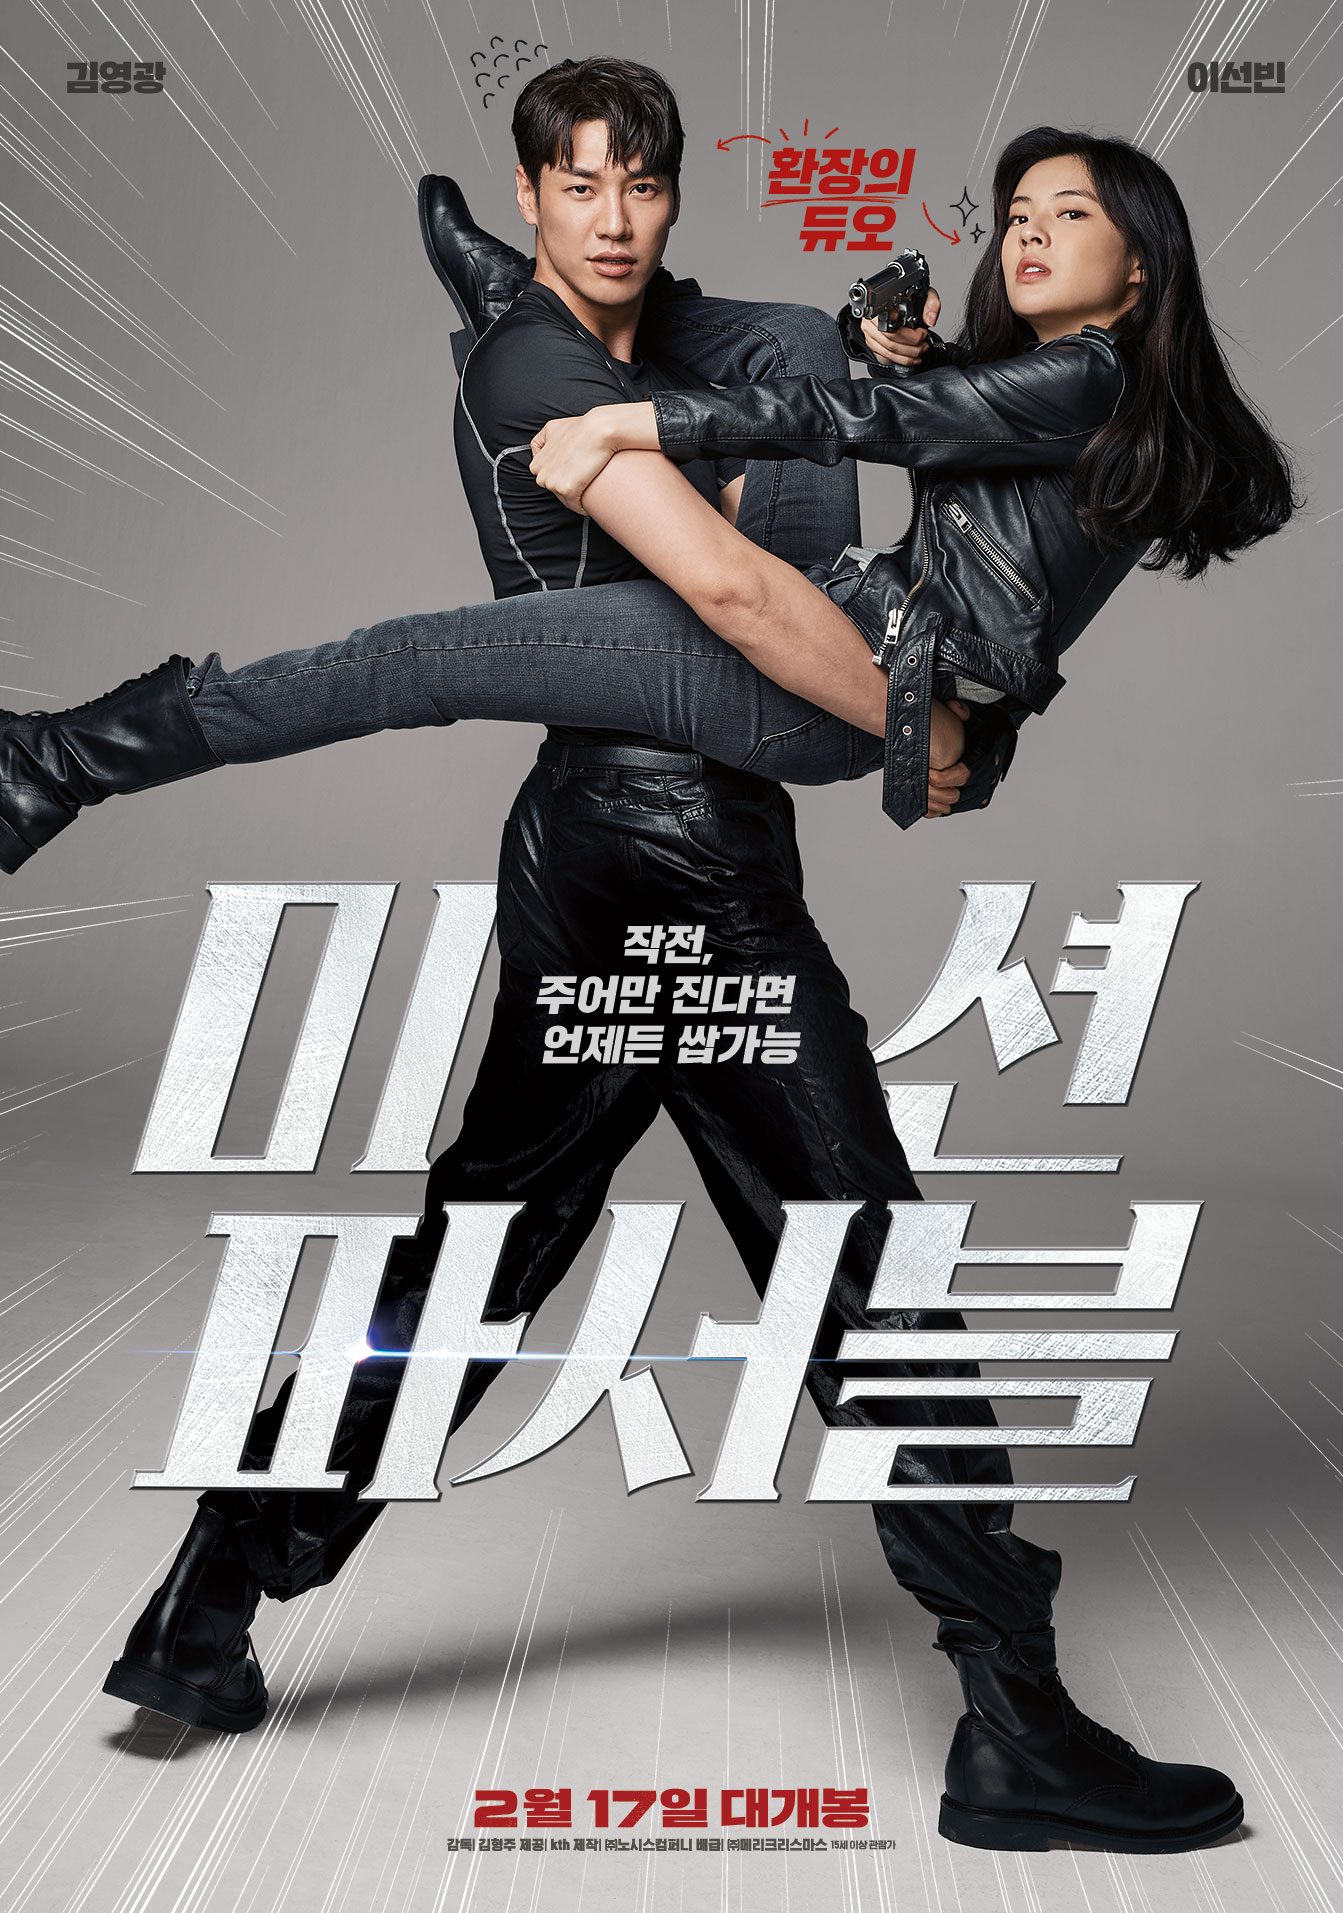 Mission Possible (2021) Korean Movie Download MP4